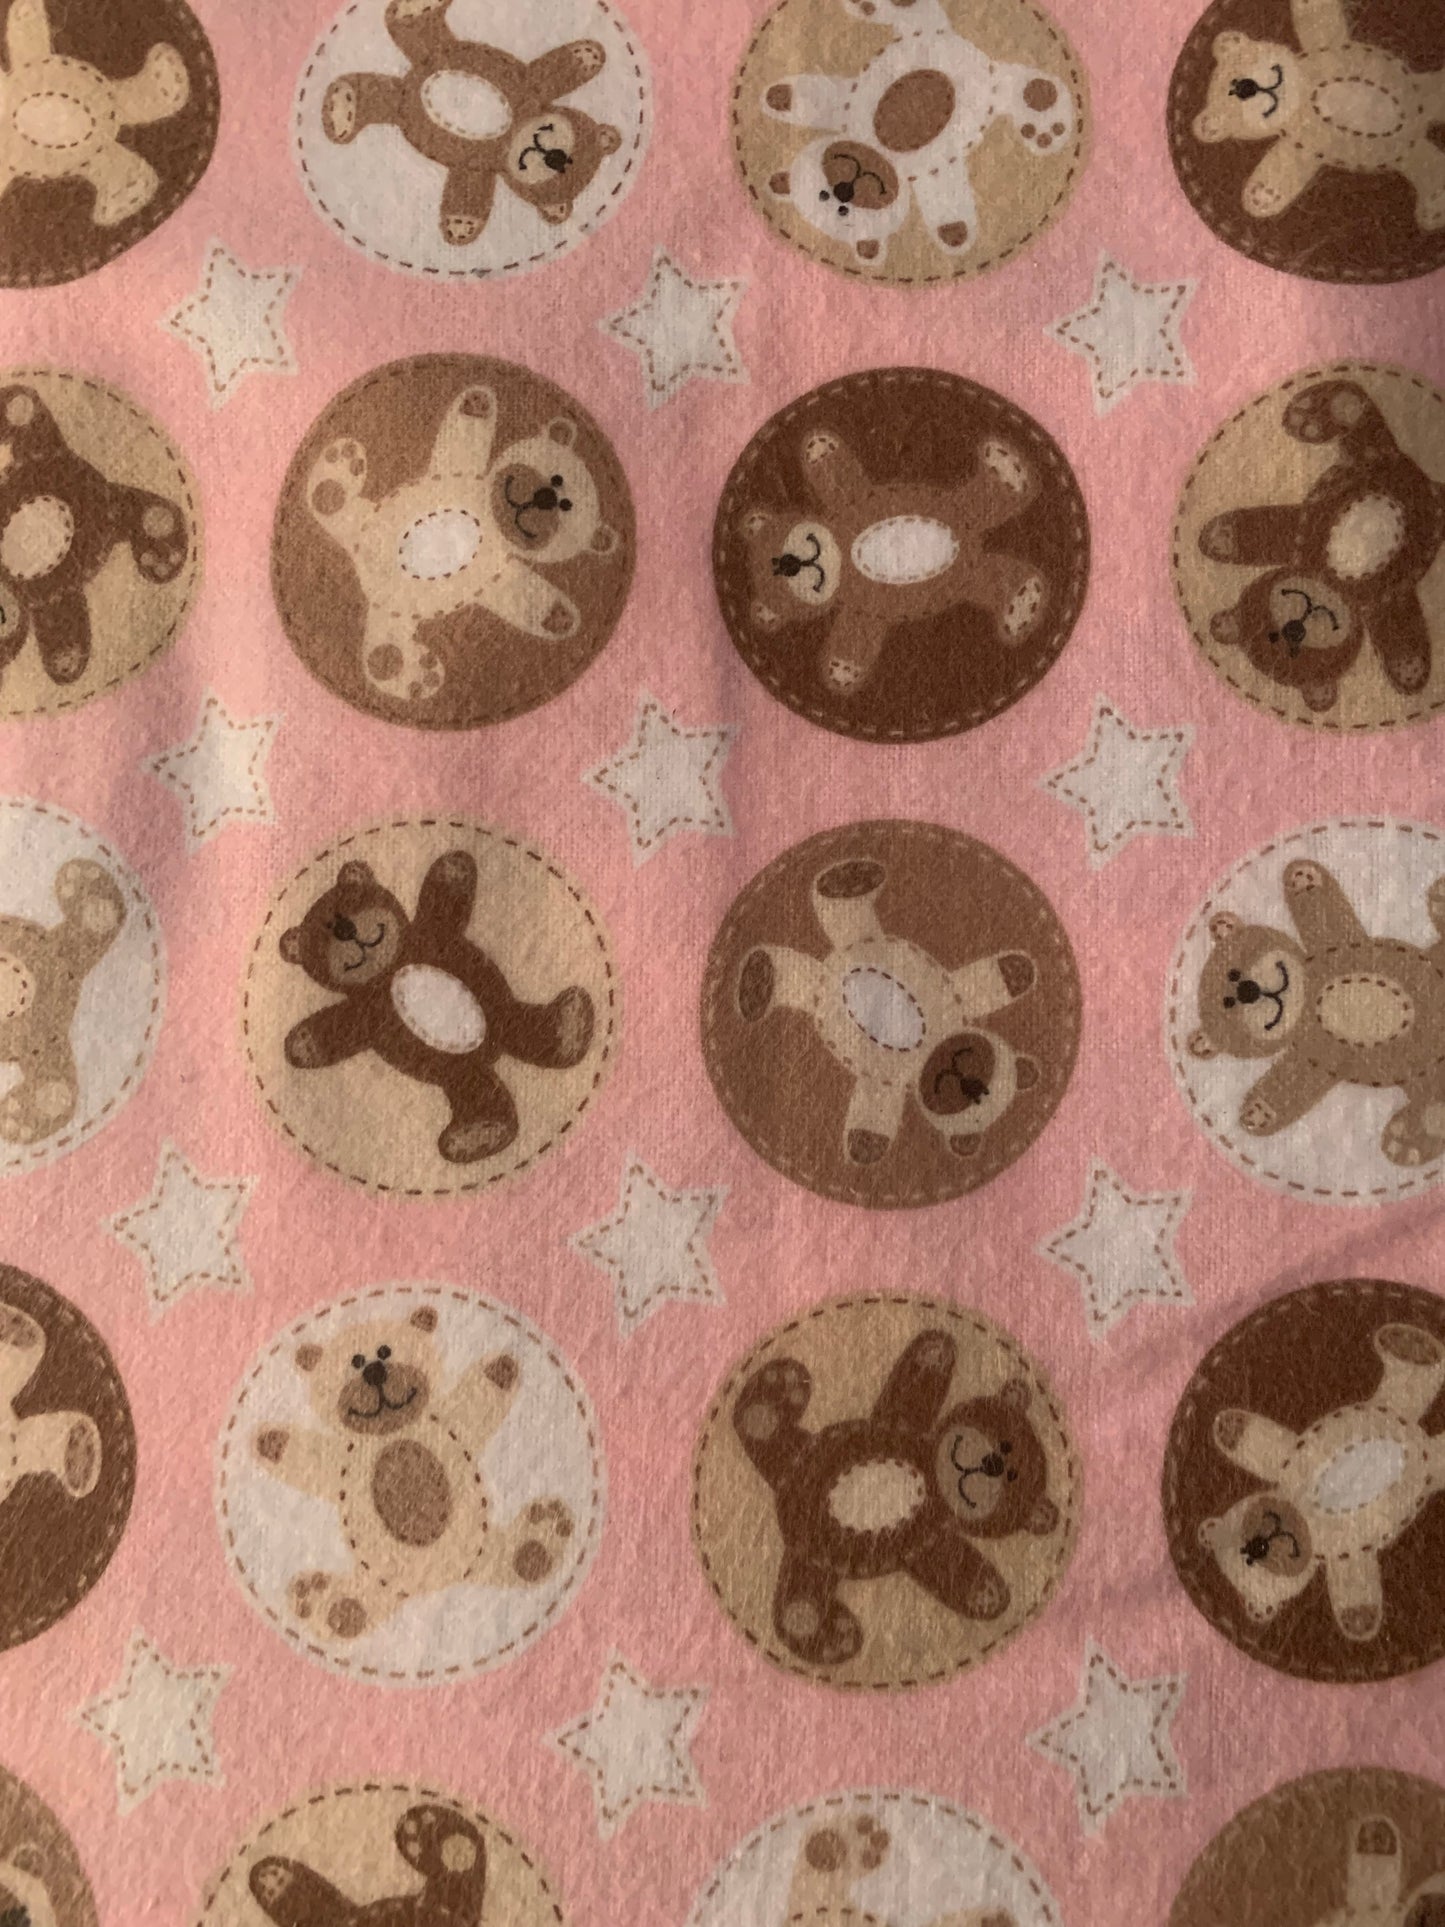 Child Weighted blanket, crib or lap size with 5 lbs, bears, giraffe, moon, star, baby jungle animals, washable, toddler or kids